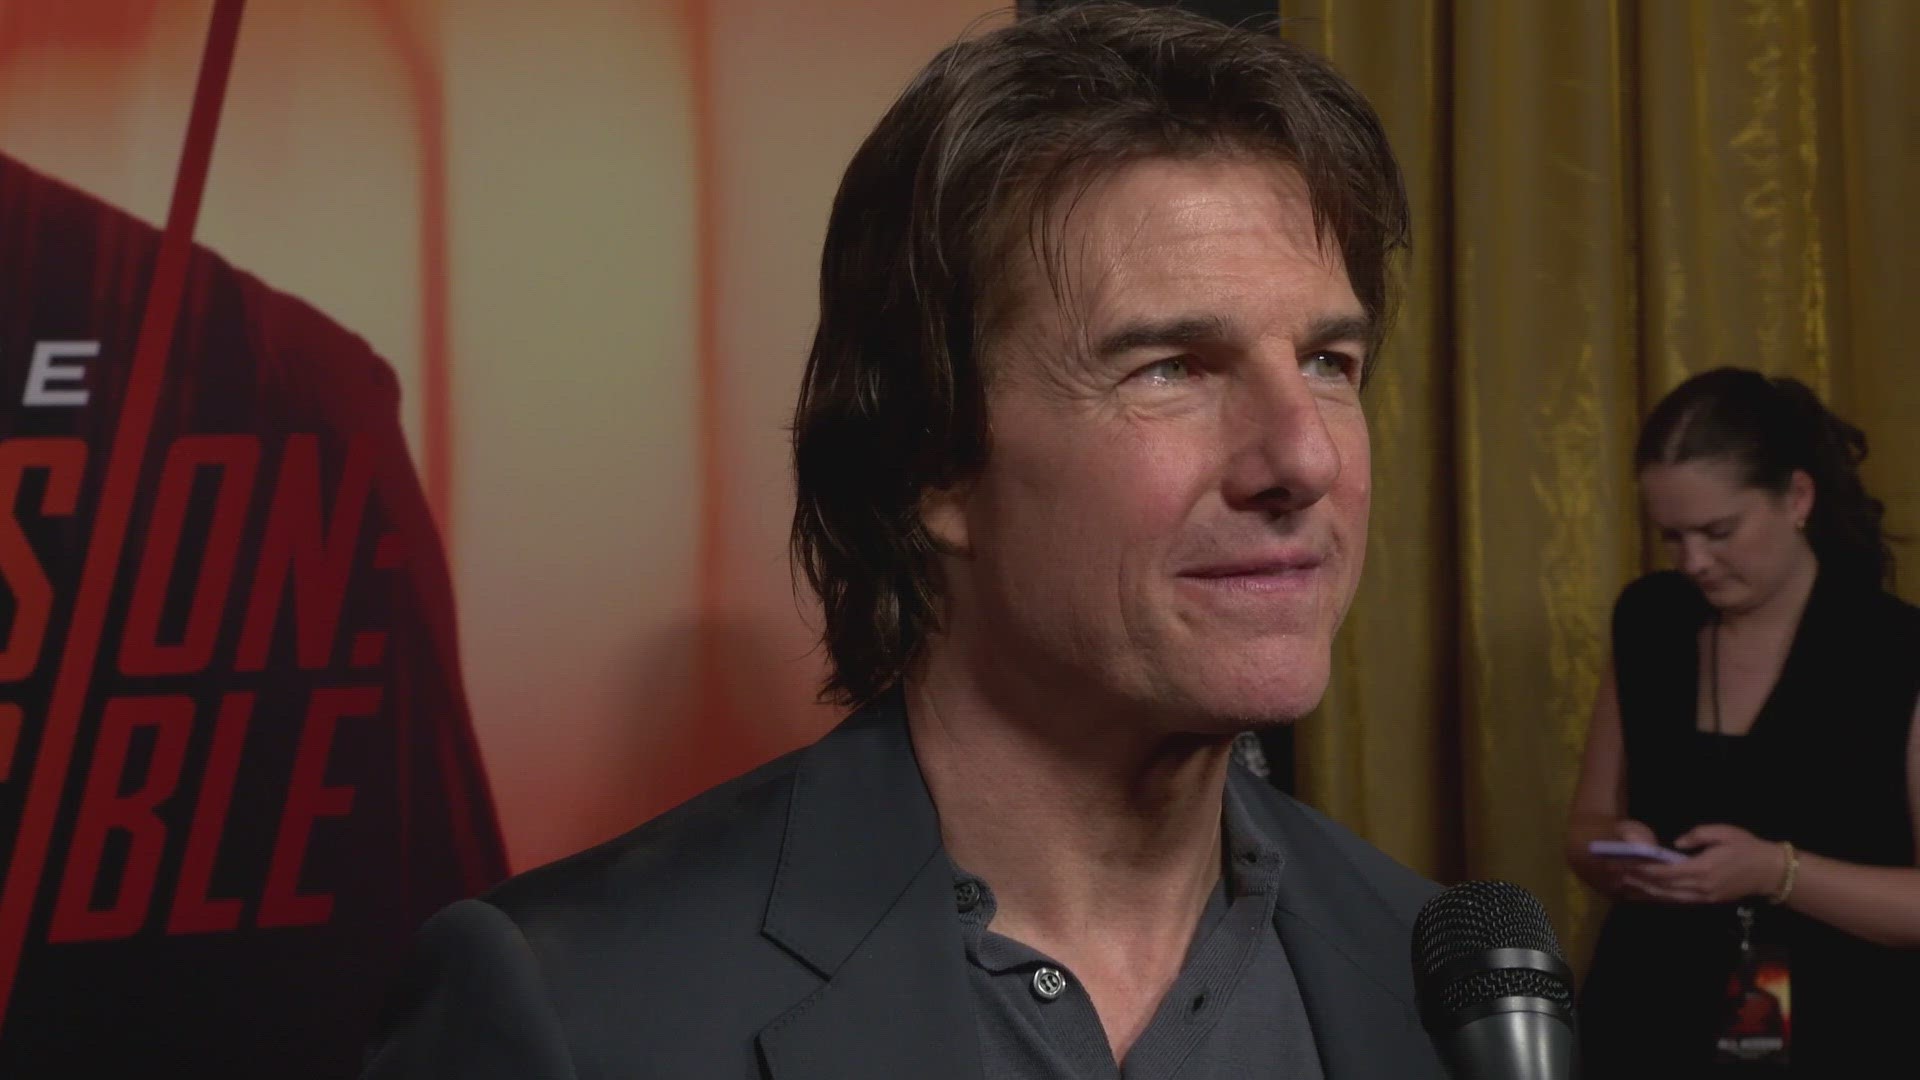 Mark S. Allen catches up with Tom Cruise as Mission: Impossible - Dead Reckoning prepares to hit theaters. Marks asks how Cruise is coming up with all these stunts!